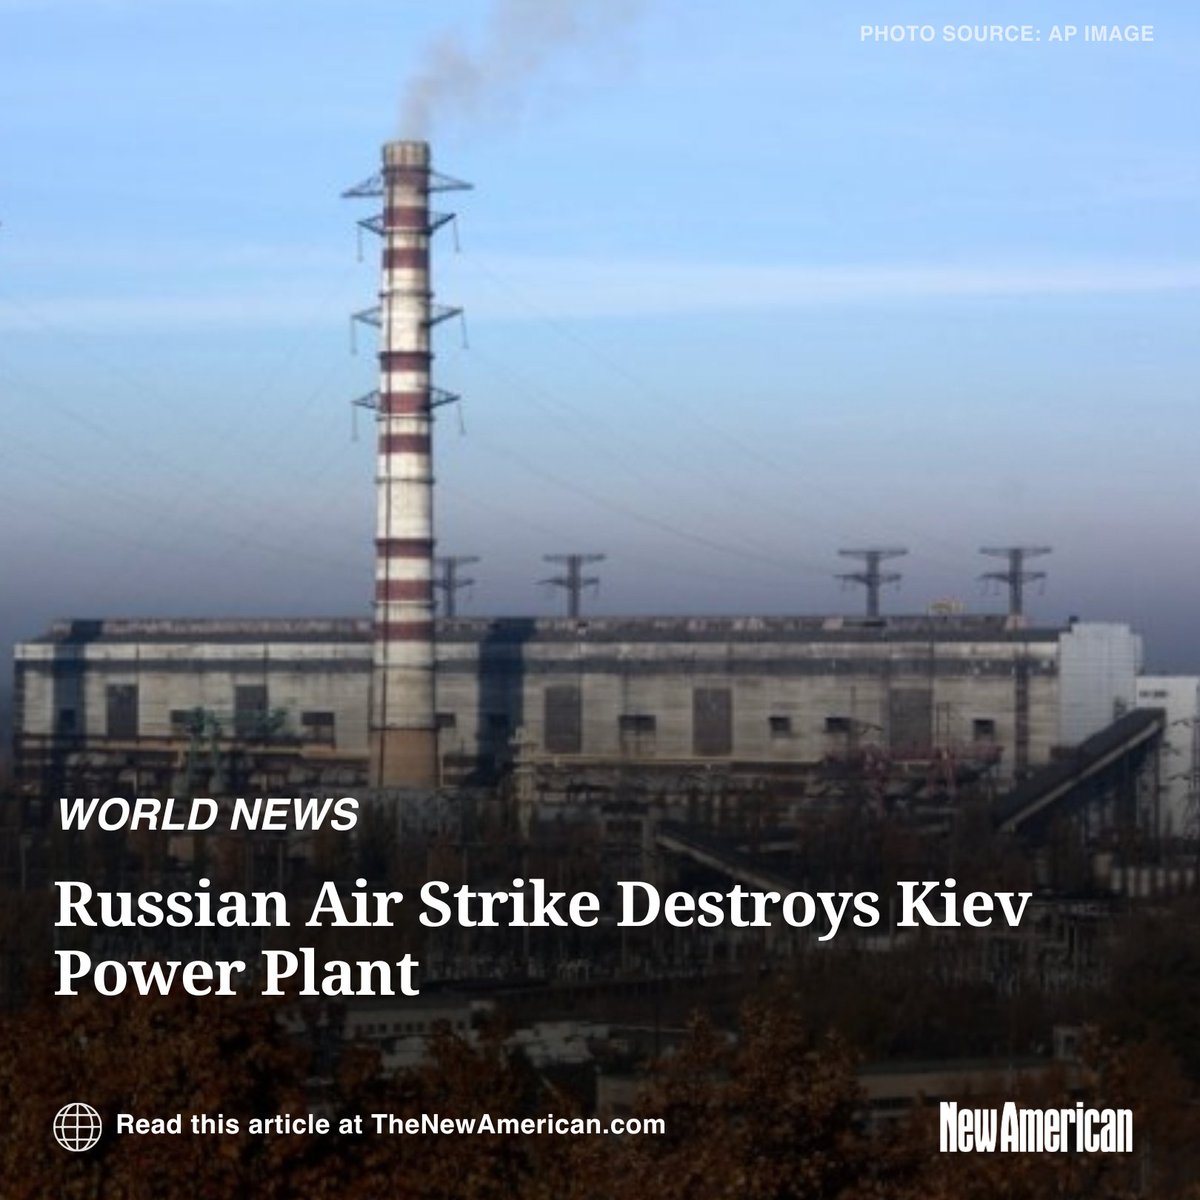 Russia DESTROYED the Trypilska Thermal Power Plant in an air strike earlier TODAY. 👀

The power plant is the largest in the #Kyiv area, located on the bank of the Dniper River, 27 miles south of #Ukraine’s capital. 📍

The state-owned energy company #Centrenergo stated the…